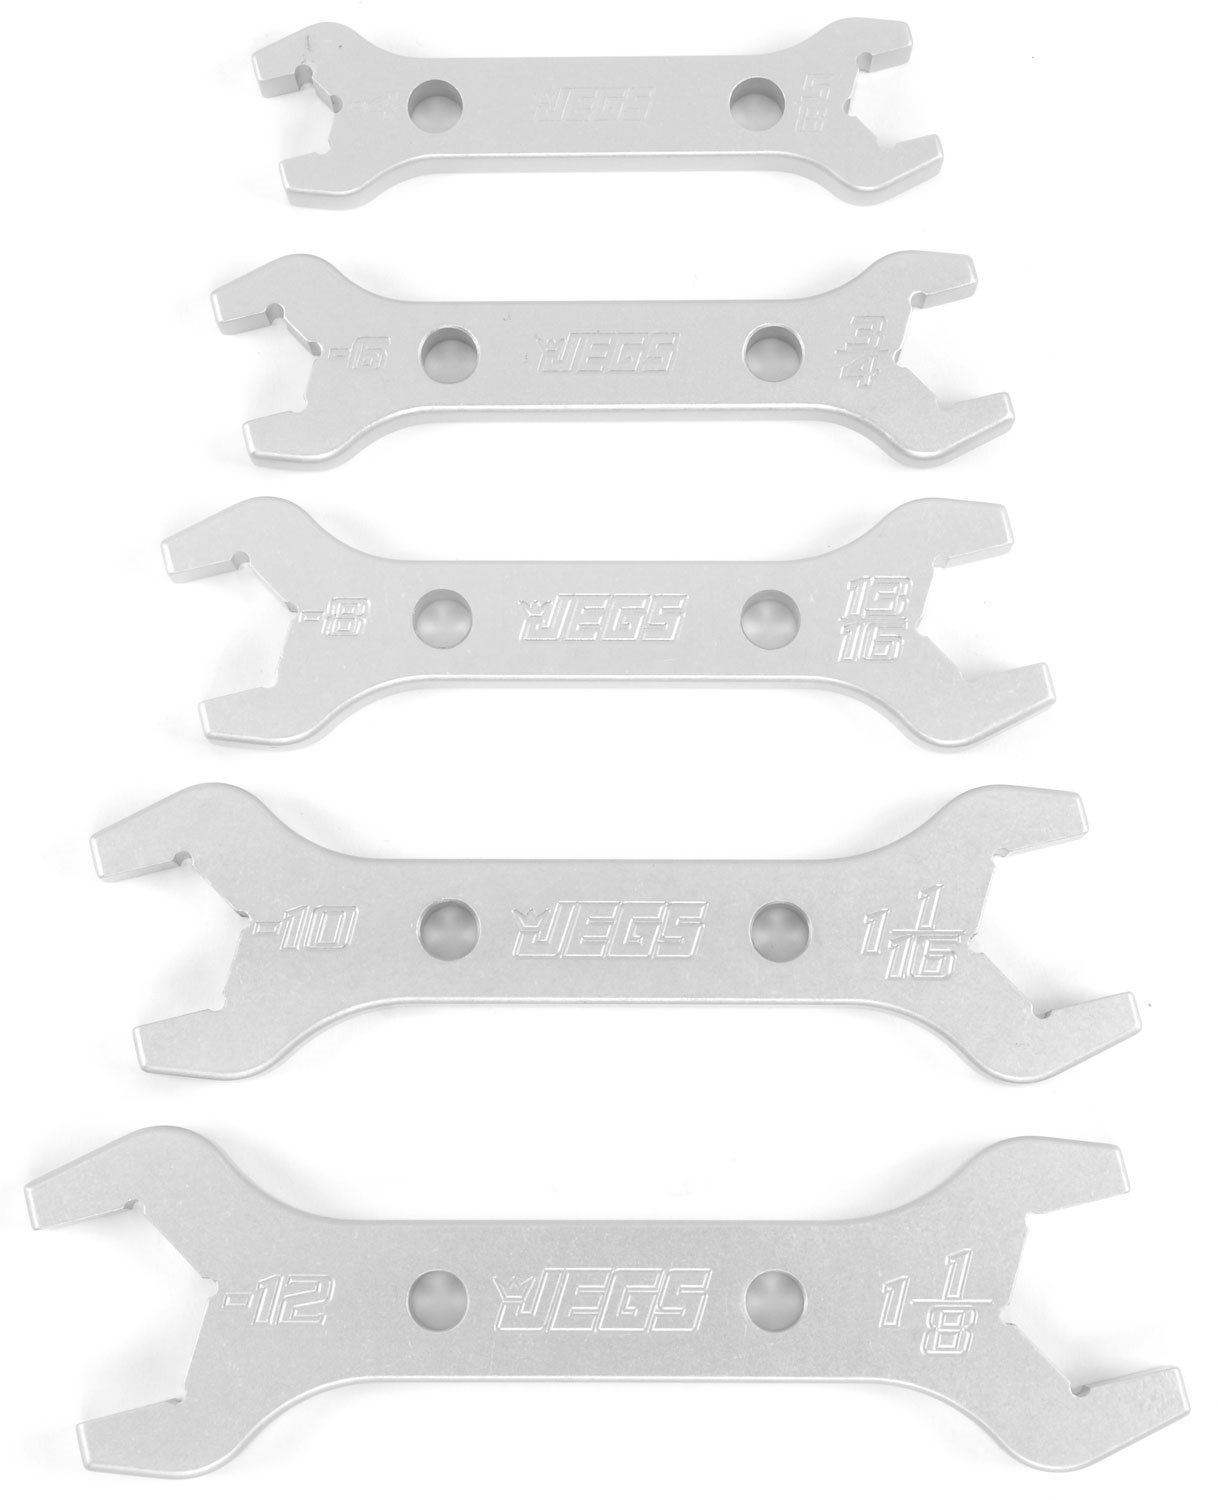 AN Combination Wrench Set Includes -4AN & 5/8 in. to -12AN & 1-1/8 in. Standard Wrenches